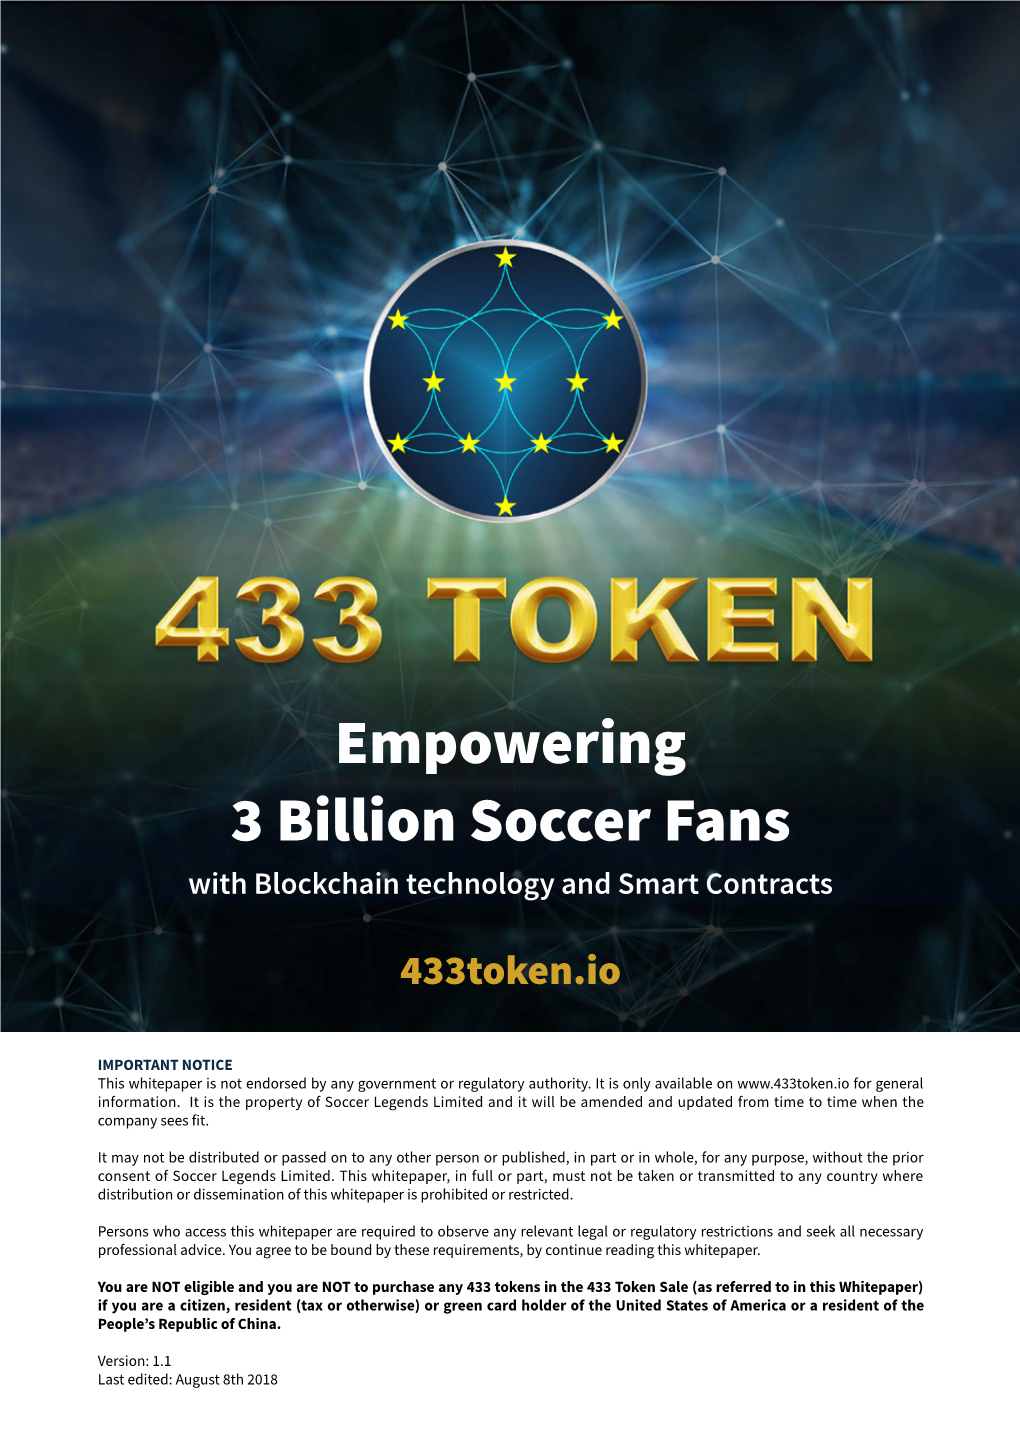 Empowering 3 Billion Soccer Fans with Blockchain Technology and Smart Contracts